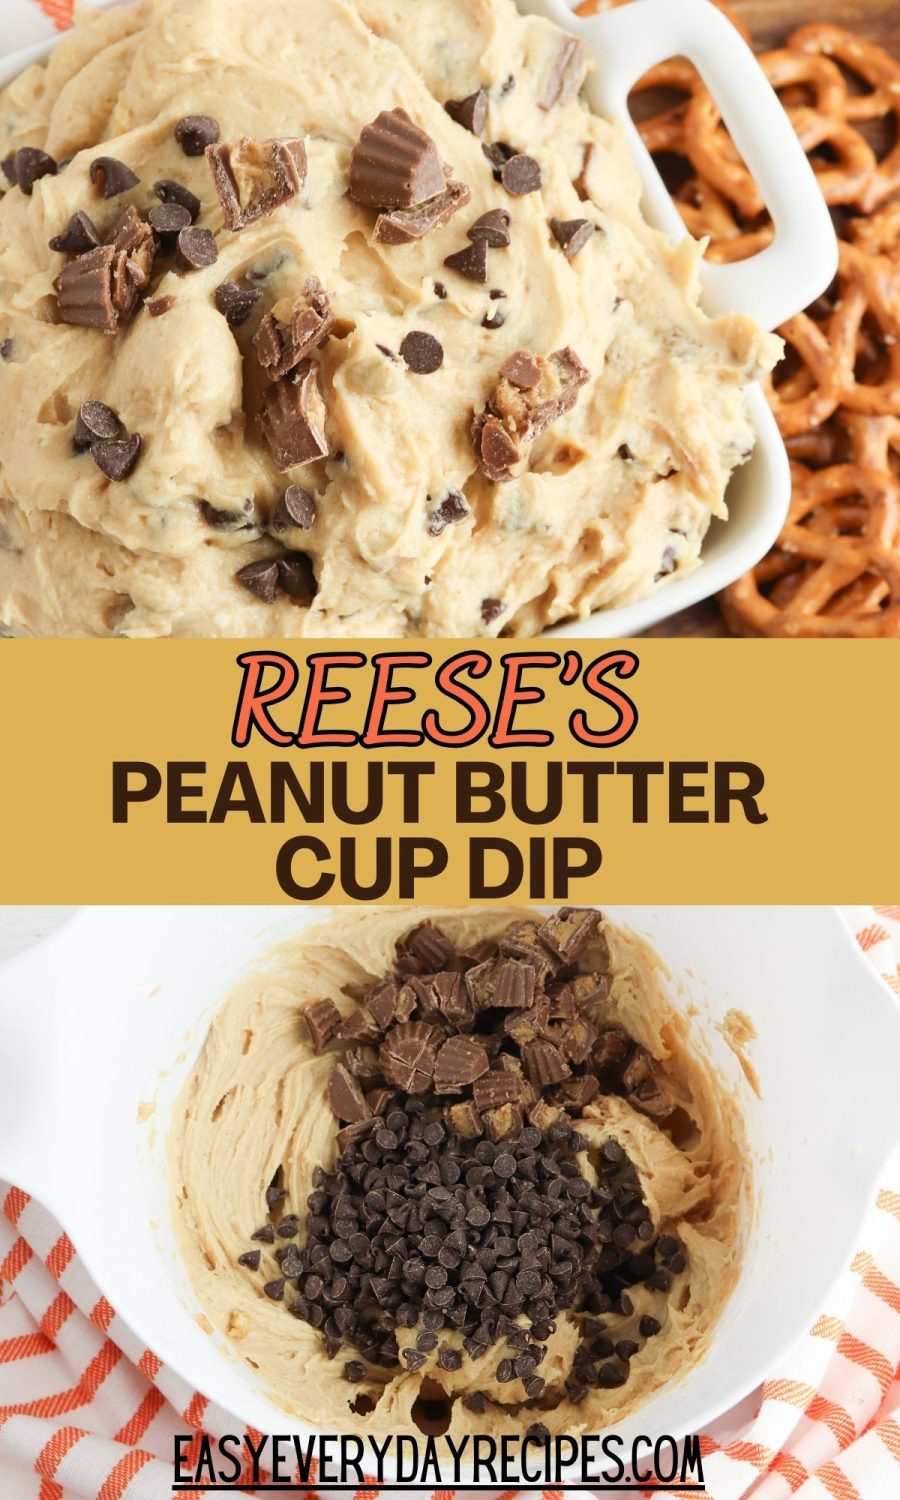 Reese's peanut butter cup dip.